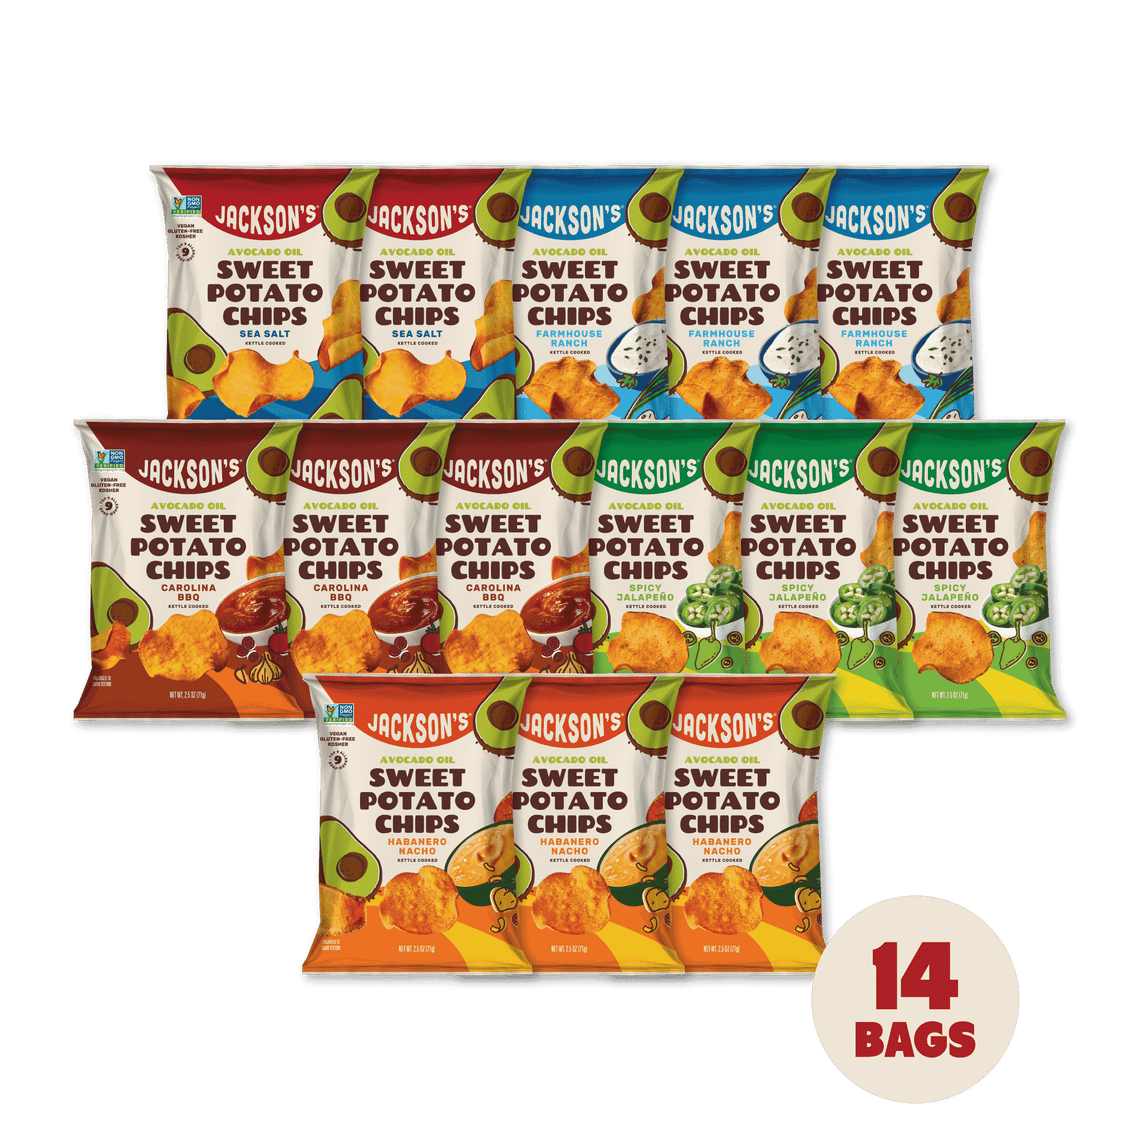 Epic Flavors Variety Pack Sweet Potato Chips in Avocado Oil 2.5oz - 14 Bags. Vegan & Gluten-free chips 